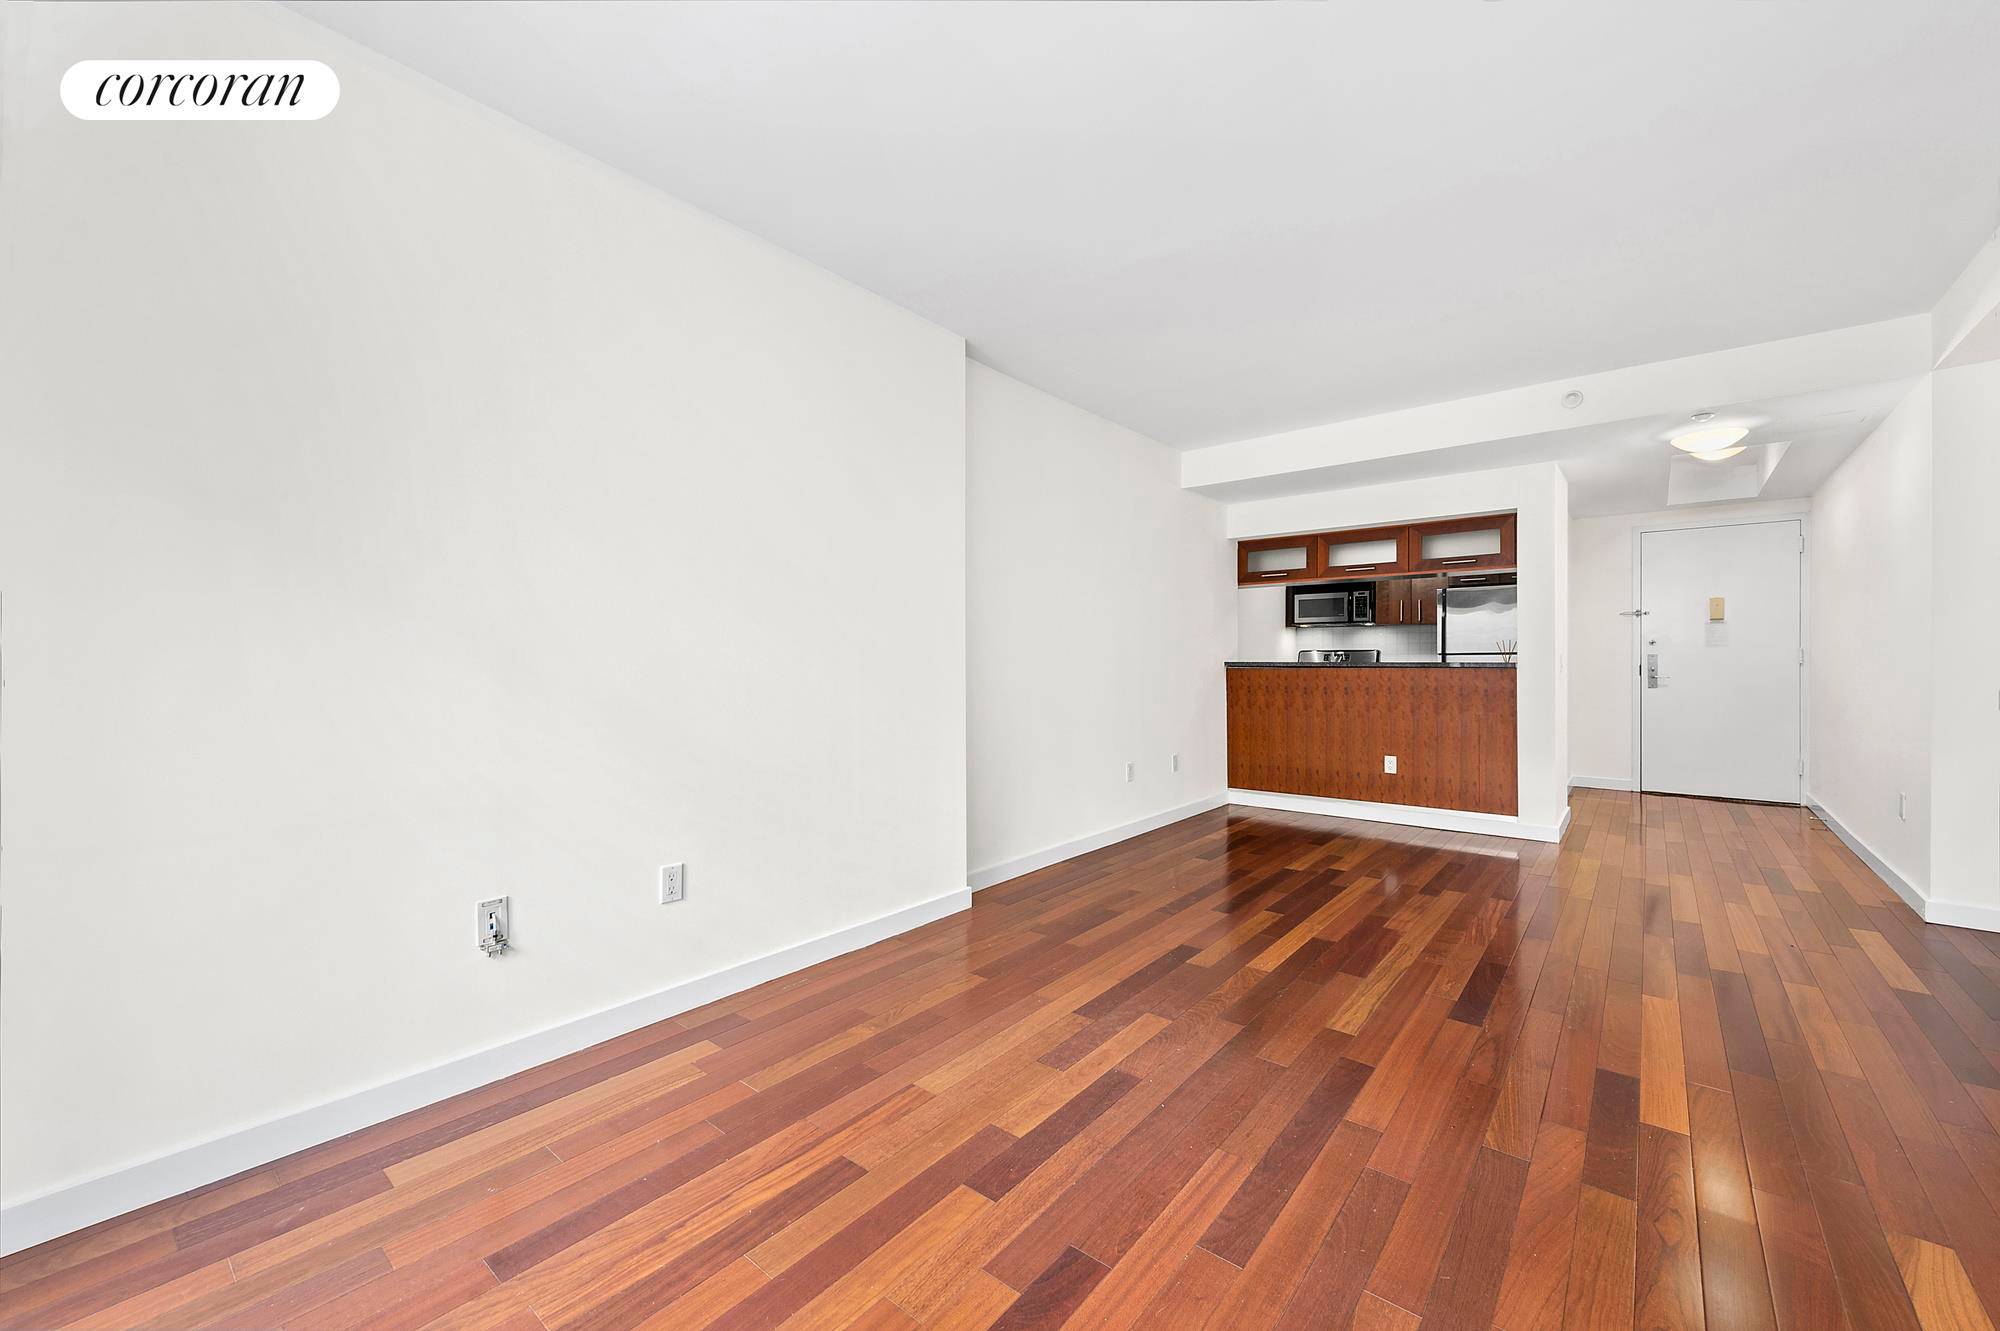 Welcome home to this spacious and pin drop quiet 1 bedroom at the ideally located Crossing 23rd, condominium.